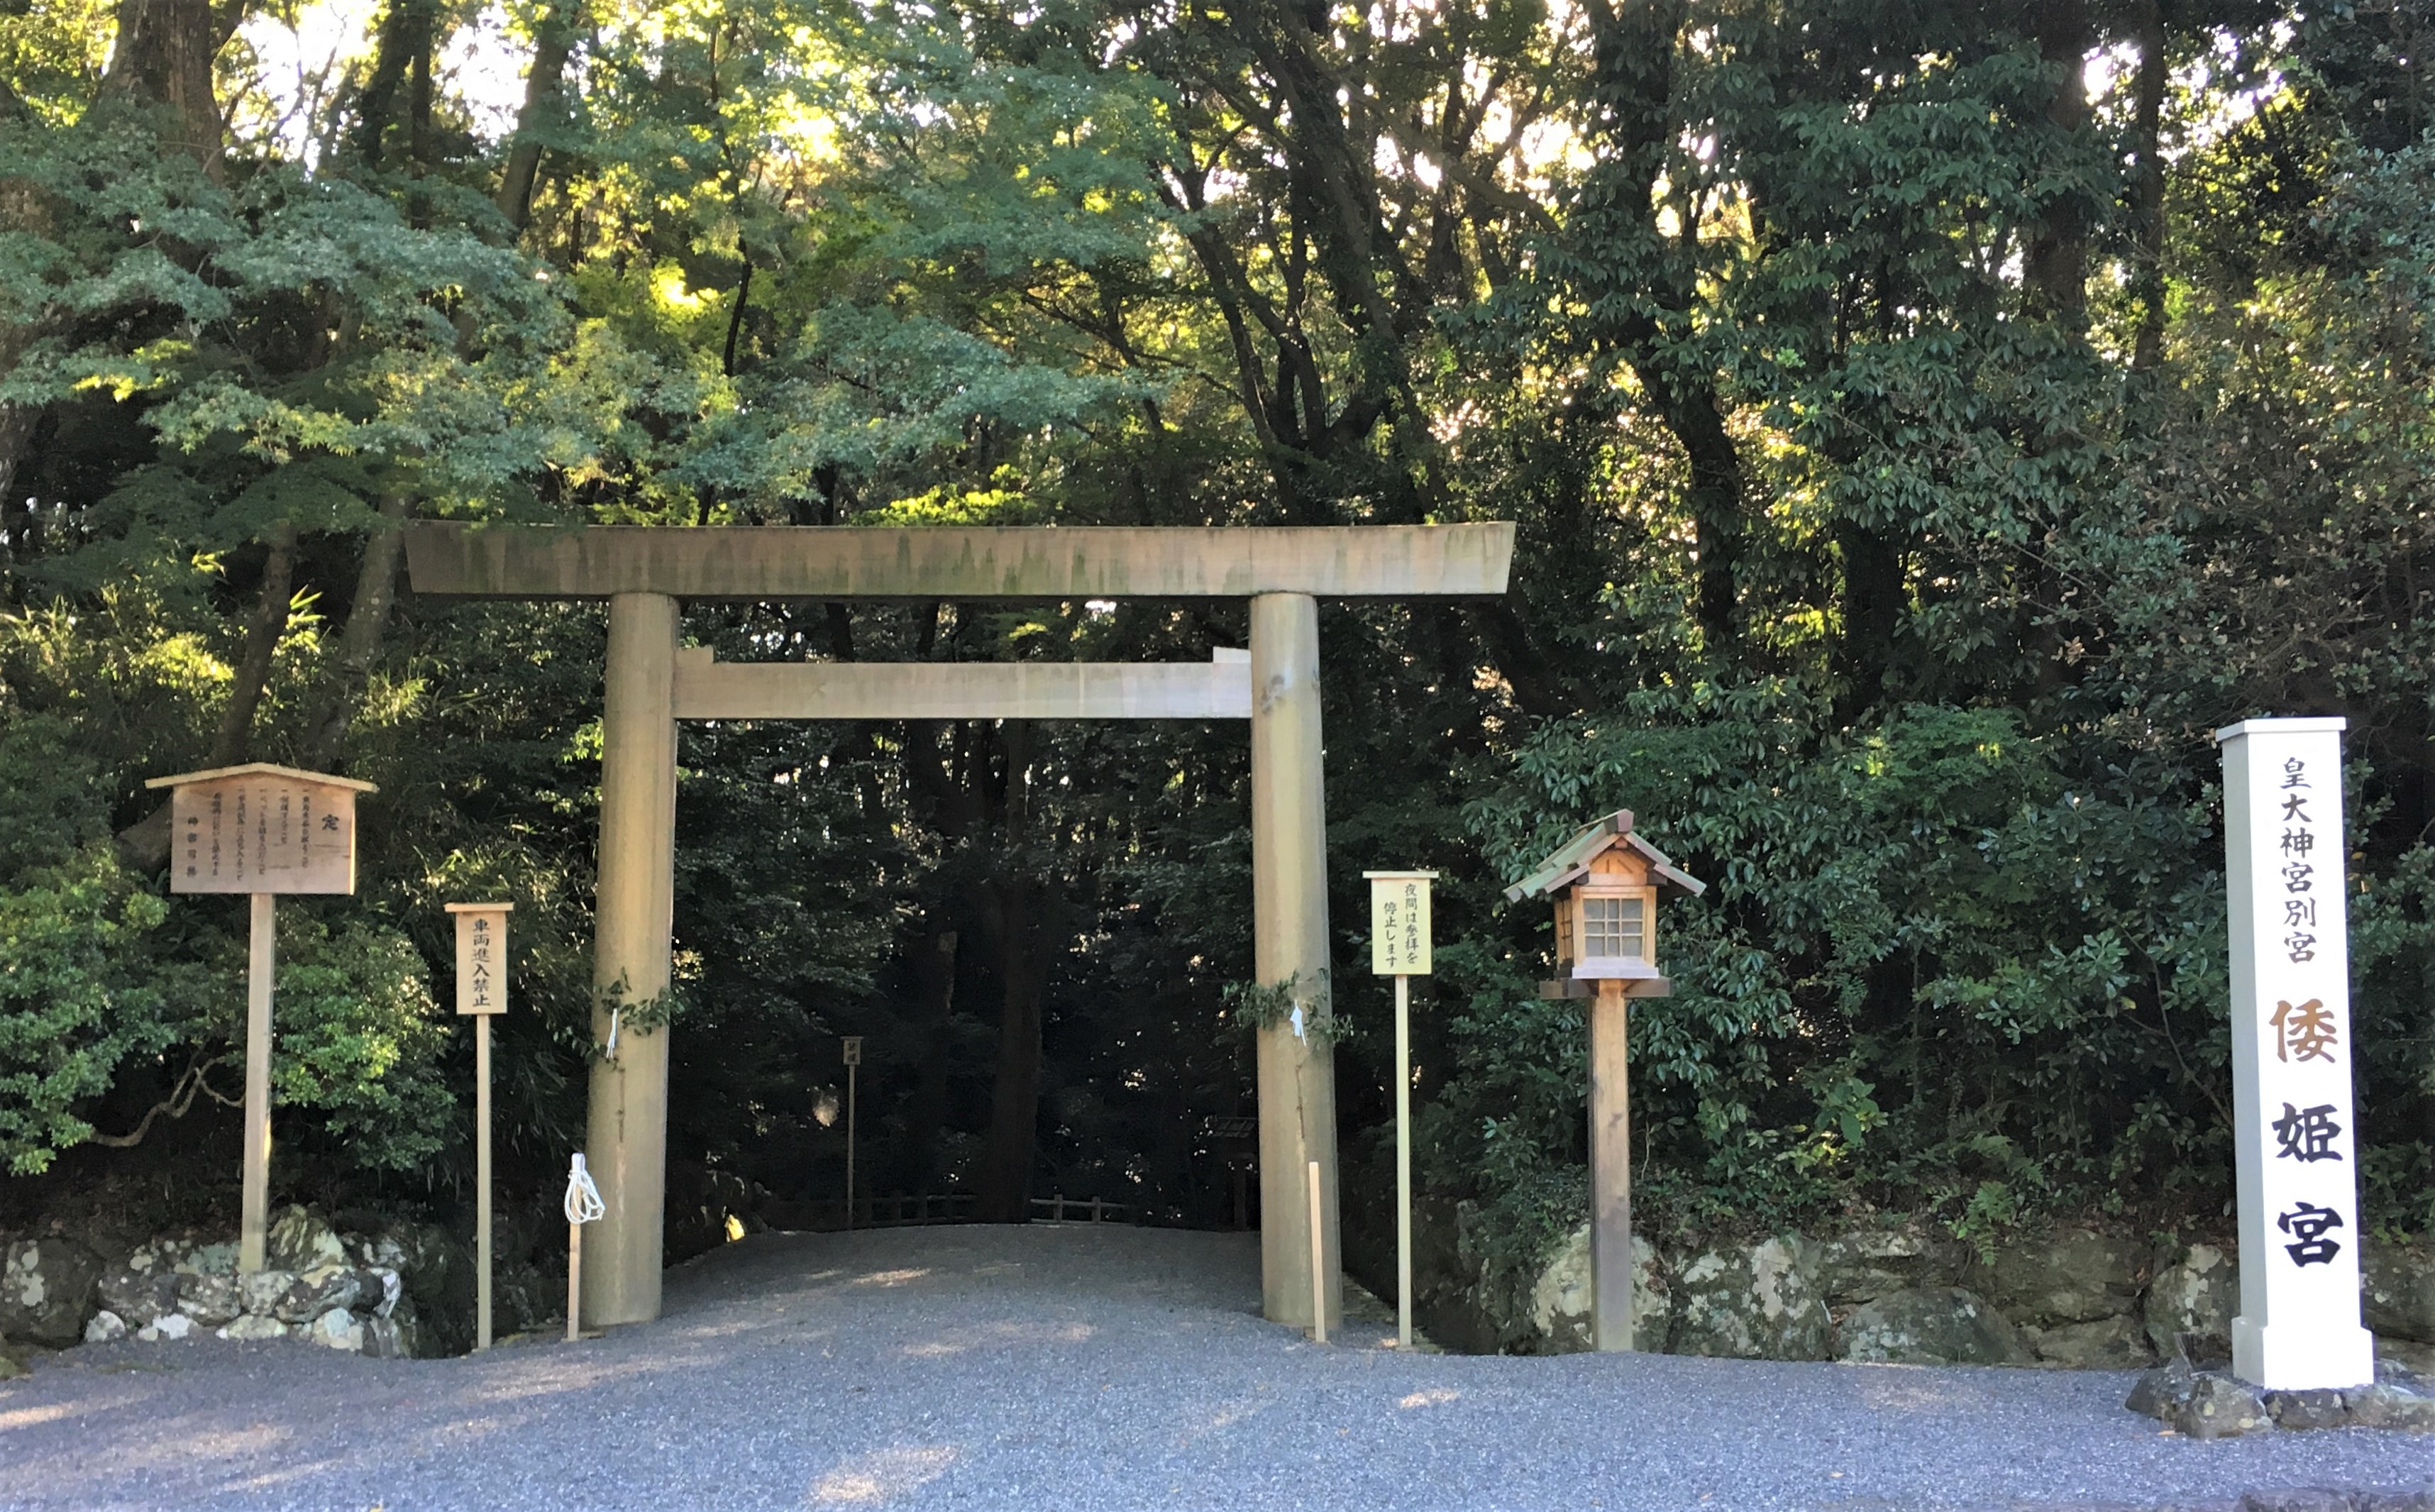 Shinto shrine in a forested area gravel path and white marker that lists name of shrine